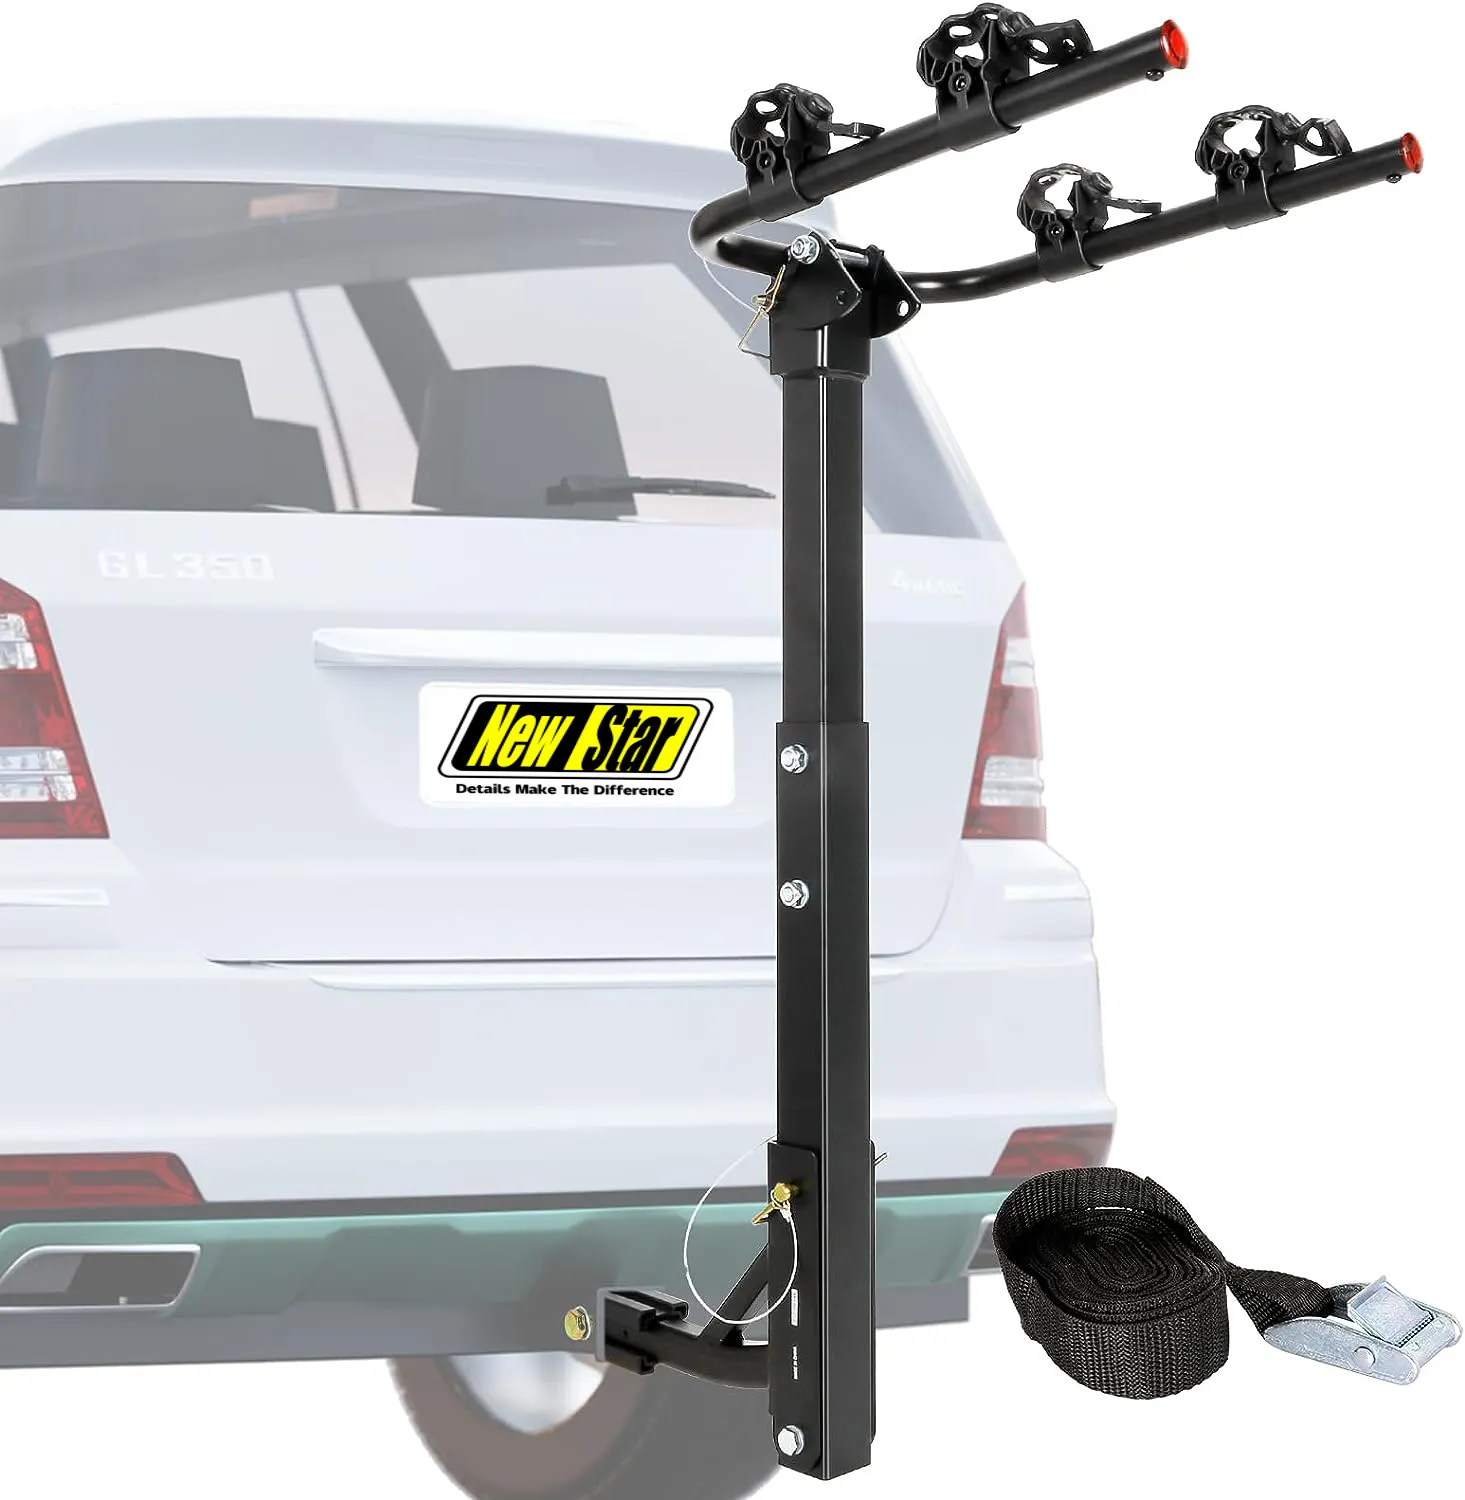 Universal adjustable foldable swing 2 3 4 bike bicycle rear hitch mount carrier rack for car suv pick up truck